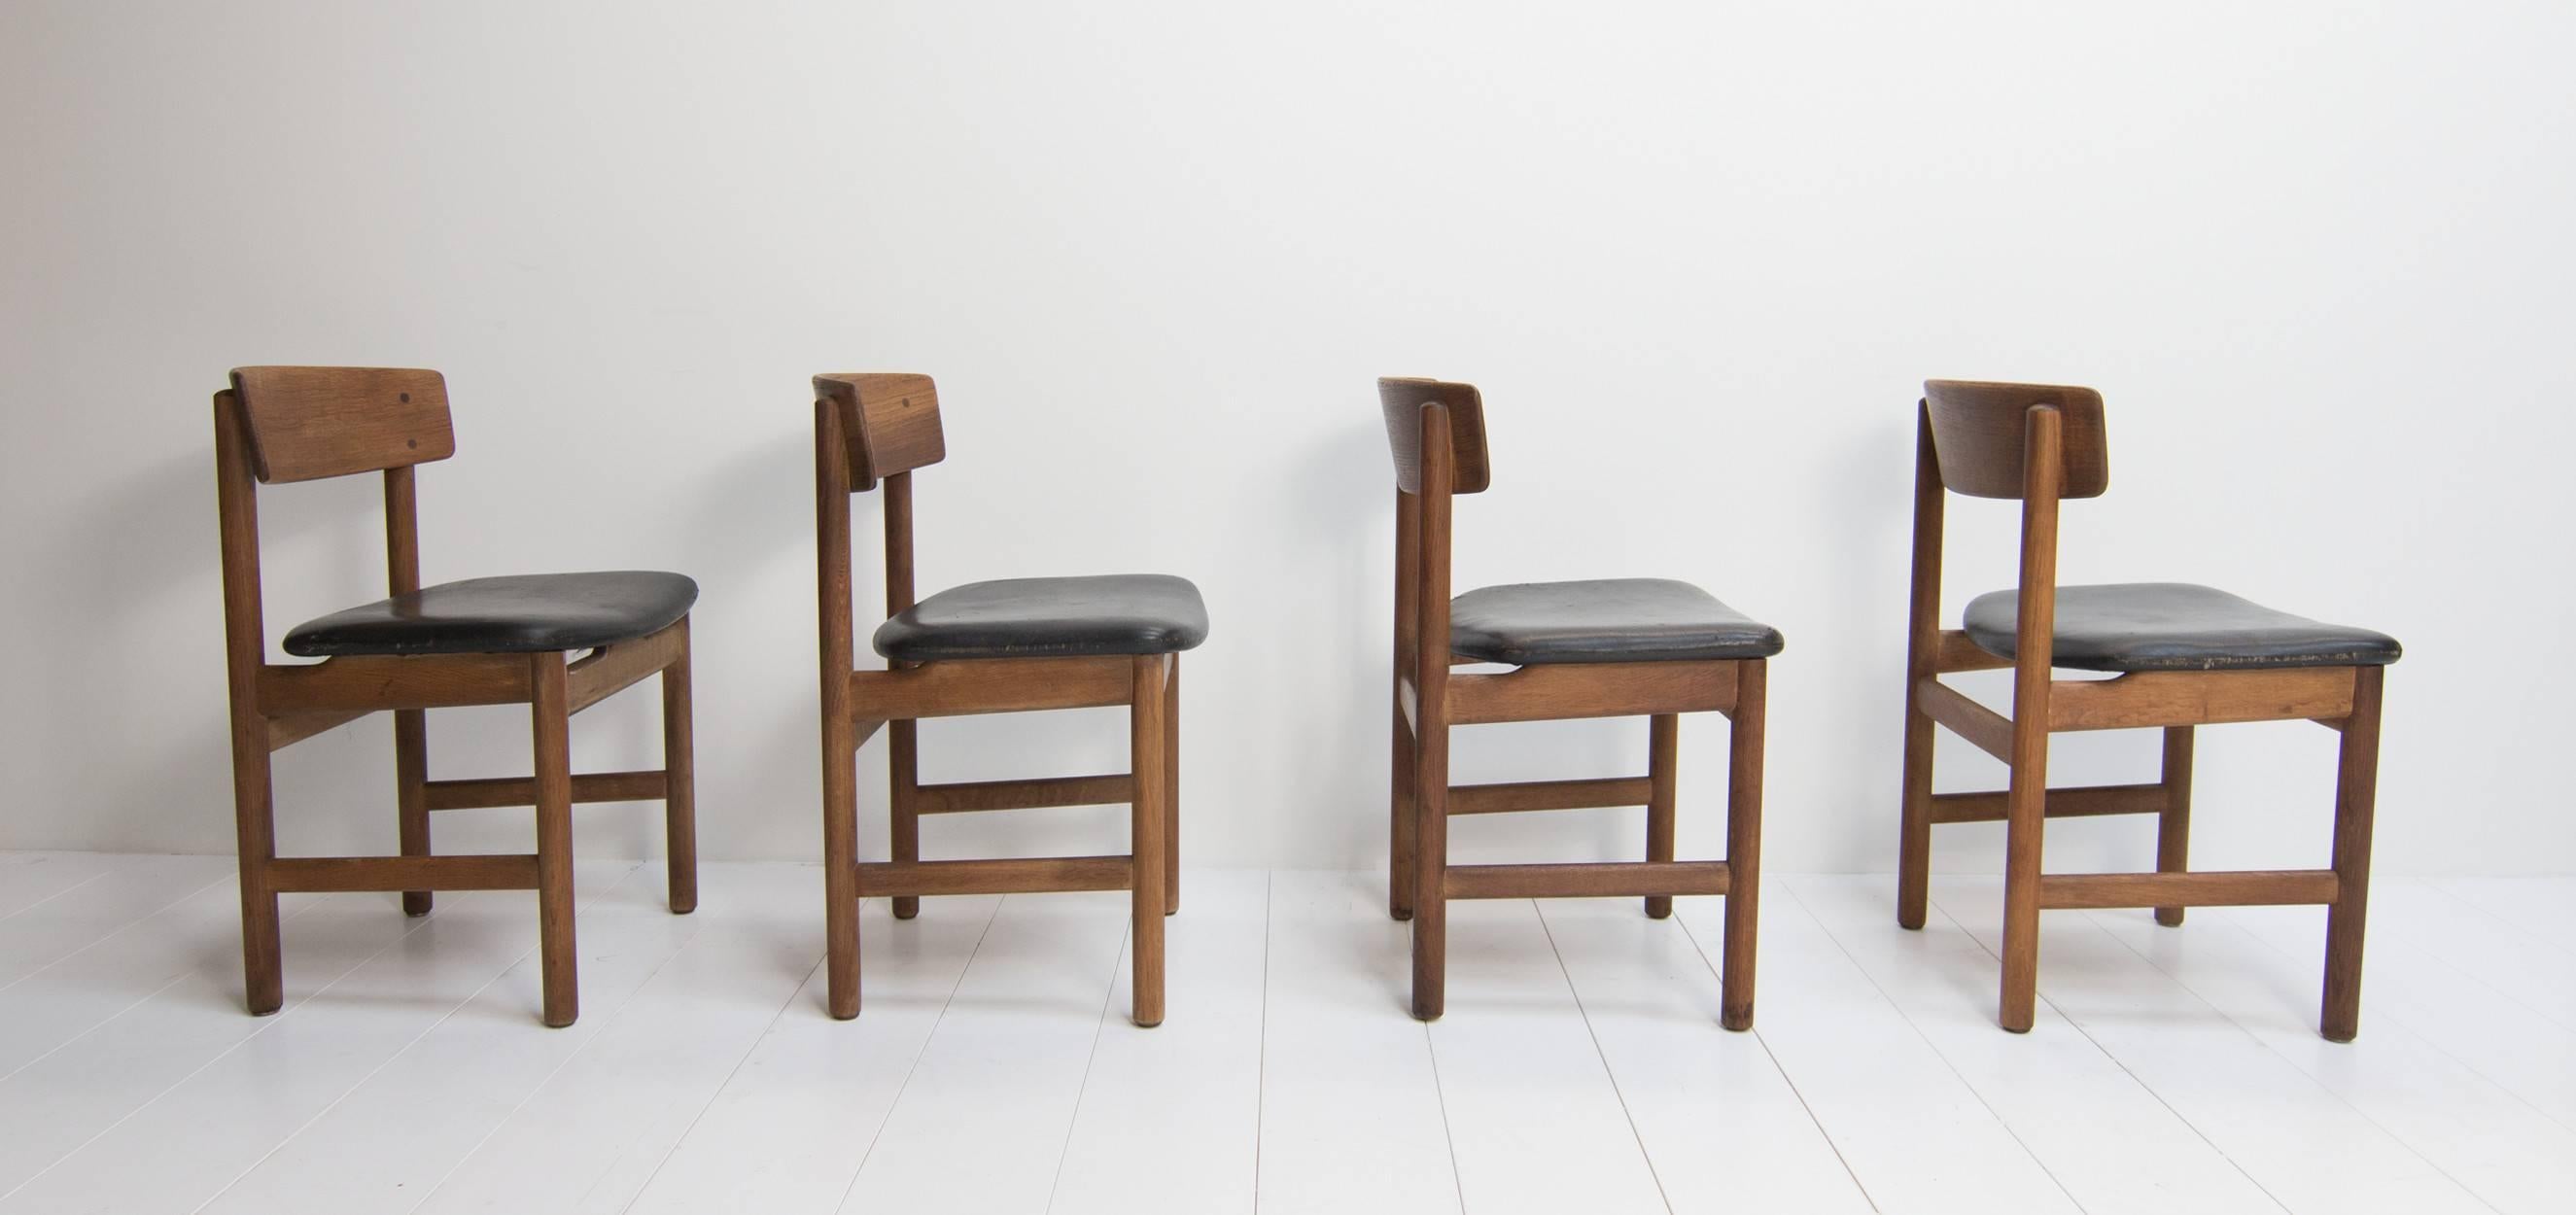 Børge Mogensen chairs, a set of four Danish design chairs model J39. Fredericia Furniture produced these Børge Mogensen chairs in the 1960s. The chairs are made of Oak. The leather of the chairs has a great patina, see pictures.

The designer of